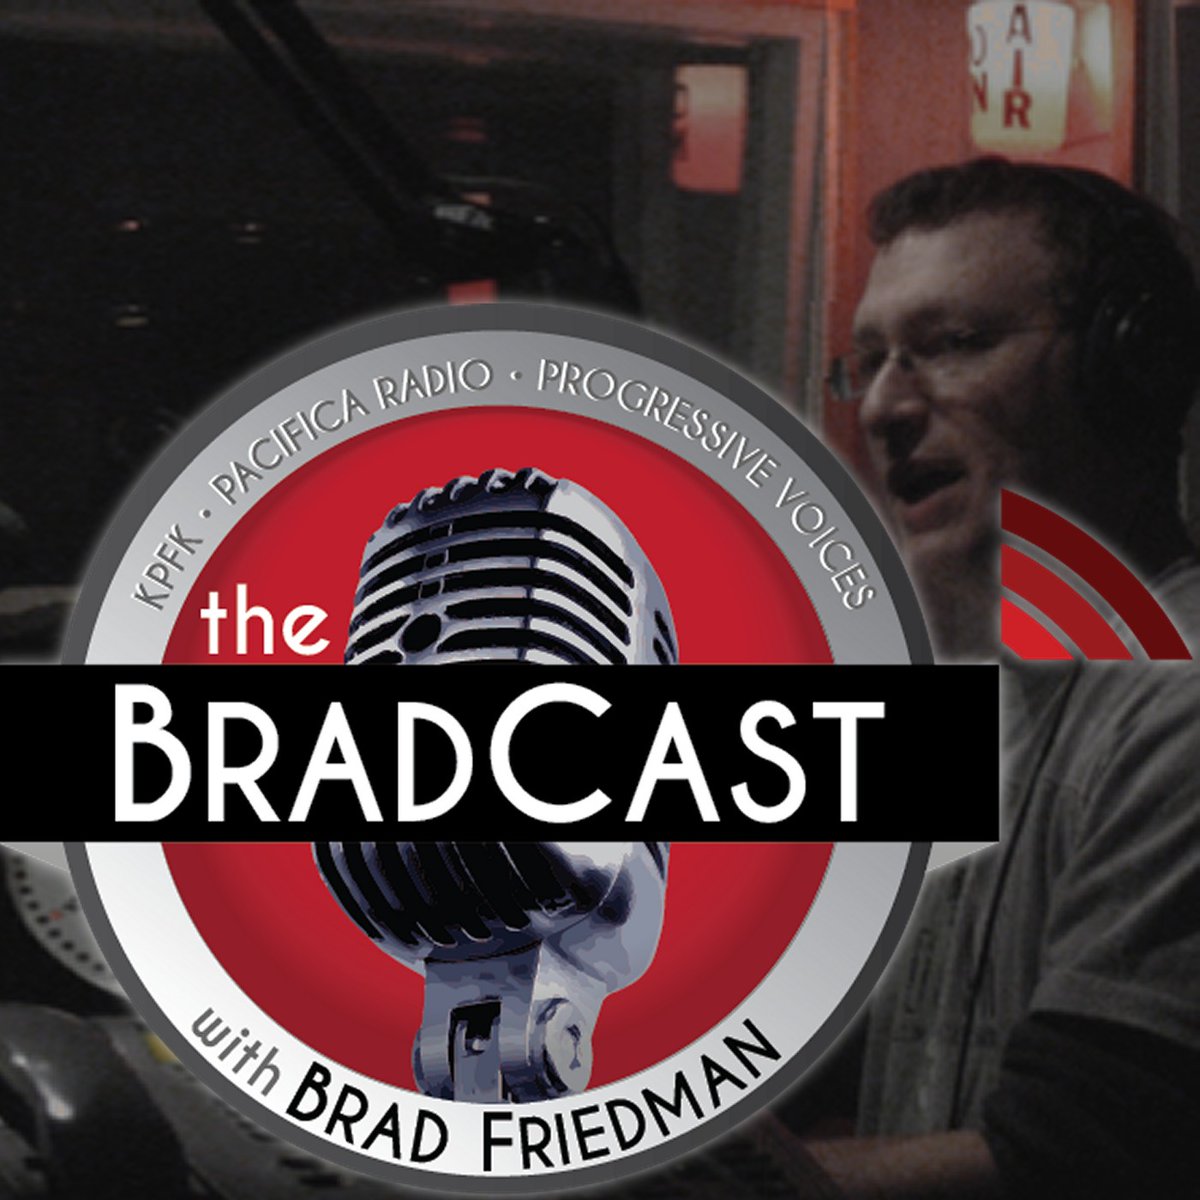 Starting TOP OF HOUR on today's LIVE @kpfk #BradCast: Activist SCOTUS finds a new req. in the Constitution for barring insurrectionists from office. Legal experts @chrisgeidner and @thelisagraves join us to explain (if possible.)
LISTEN LIVE 6p ET/3p PT: kpfk.org